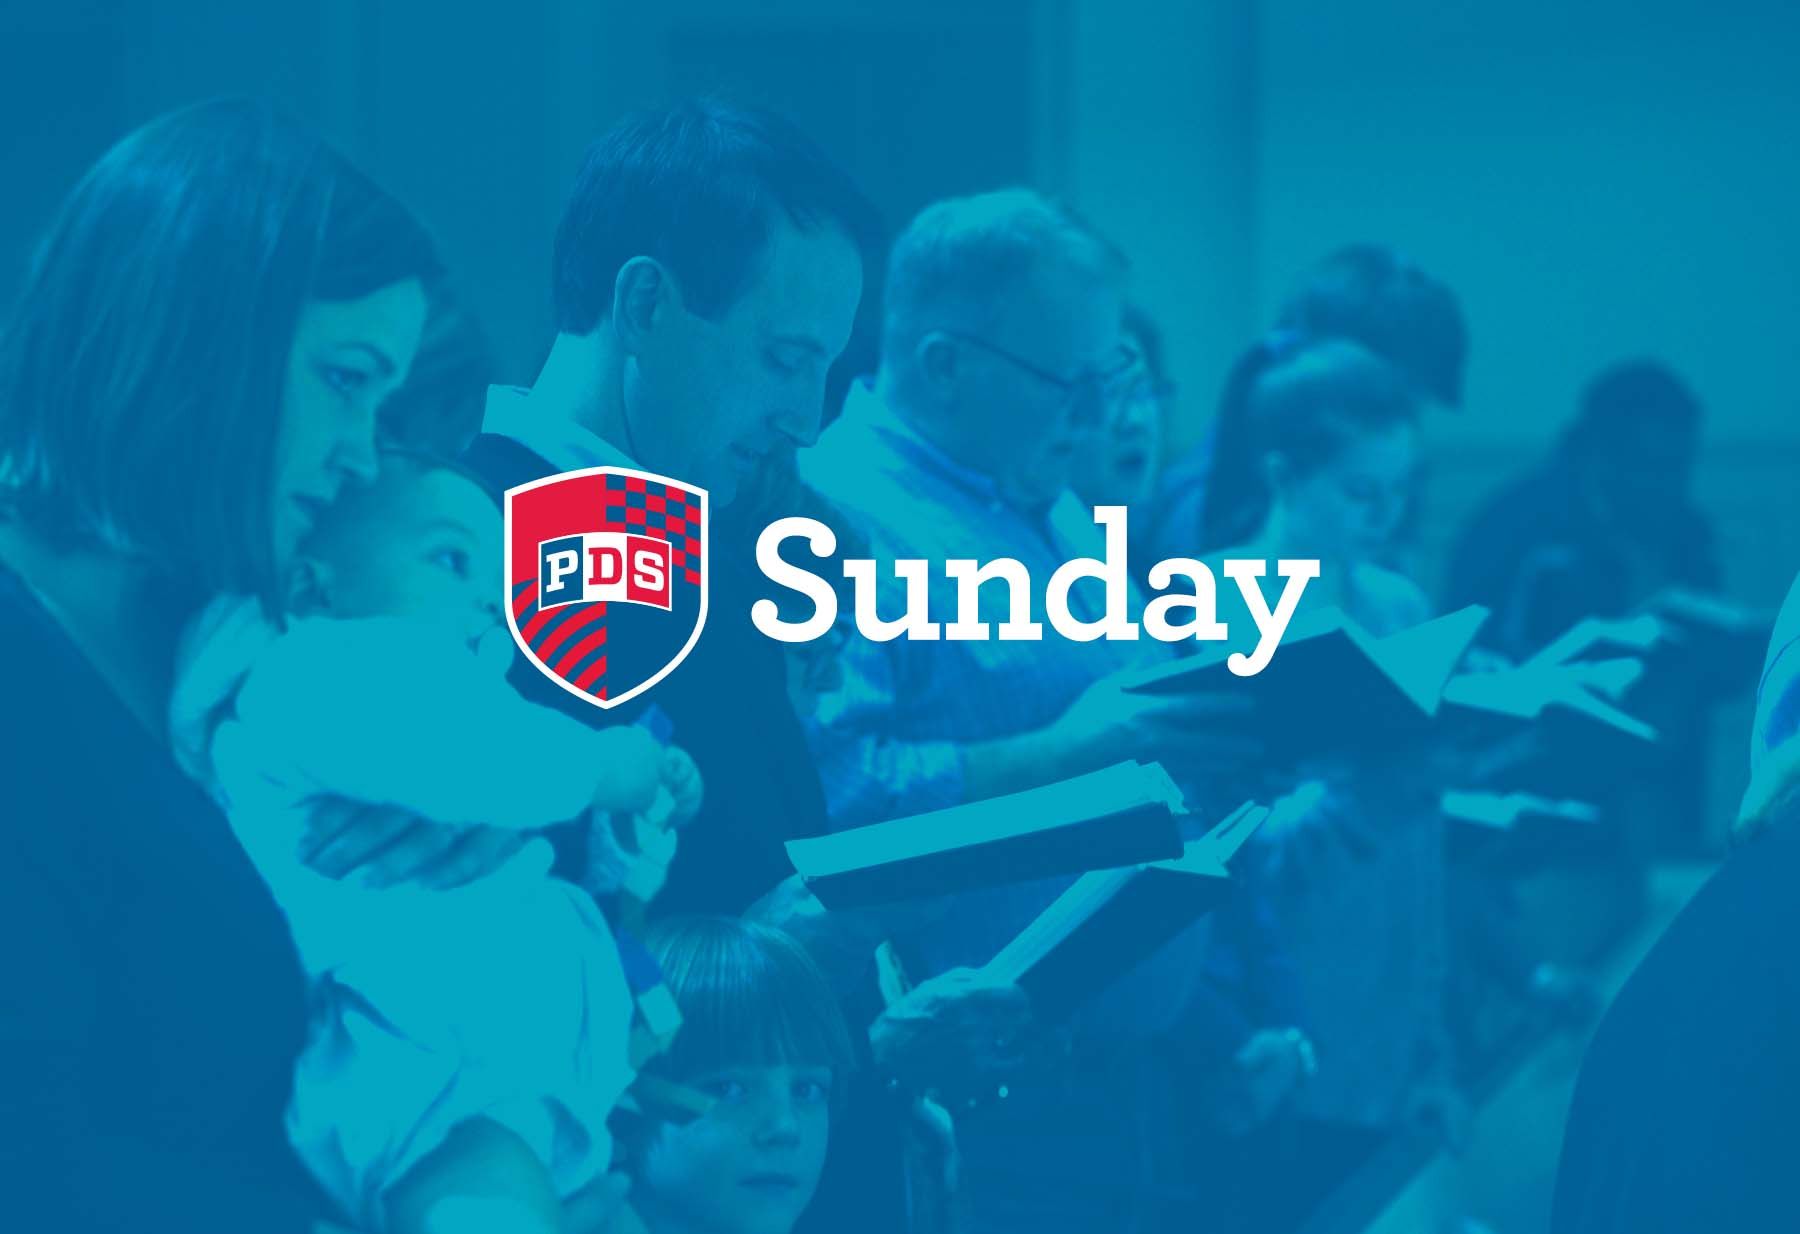 PDS Sunday at 2PC - February 4